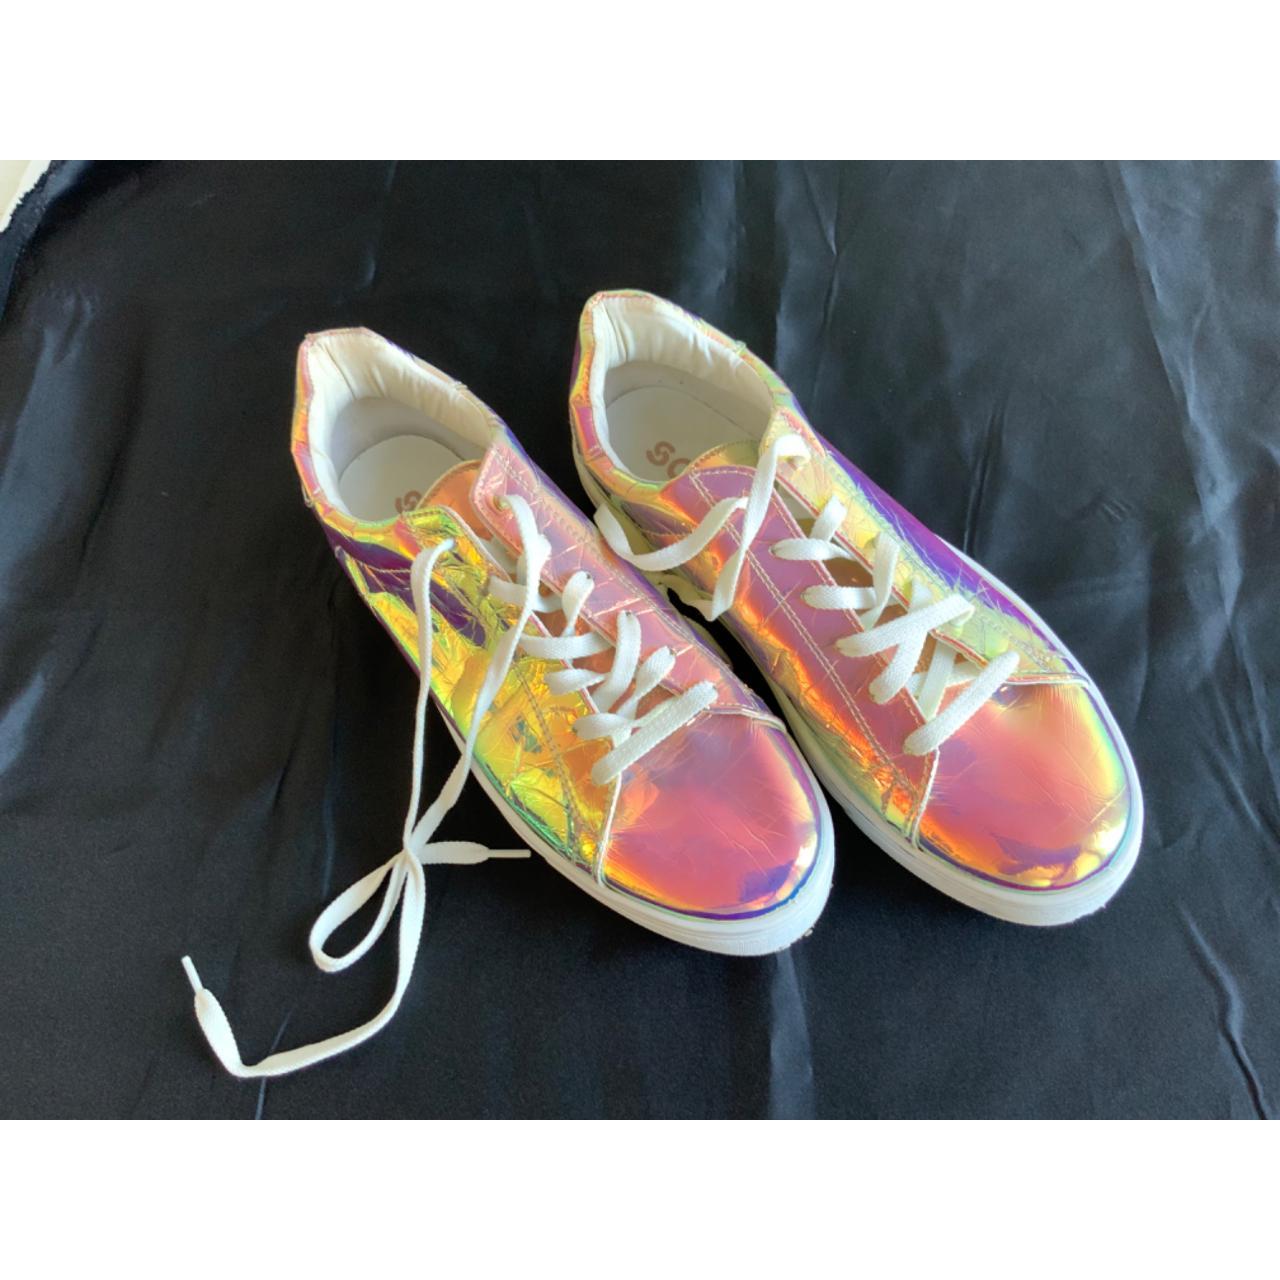 Product Image 1 - Schuh London casual/sneakers

Size: Womens US